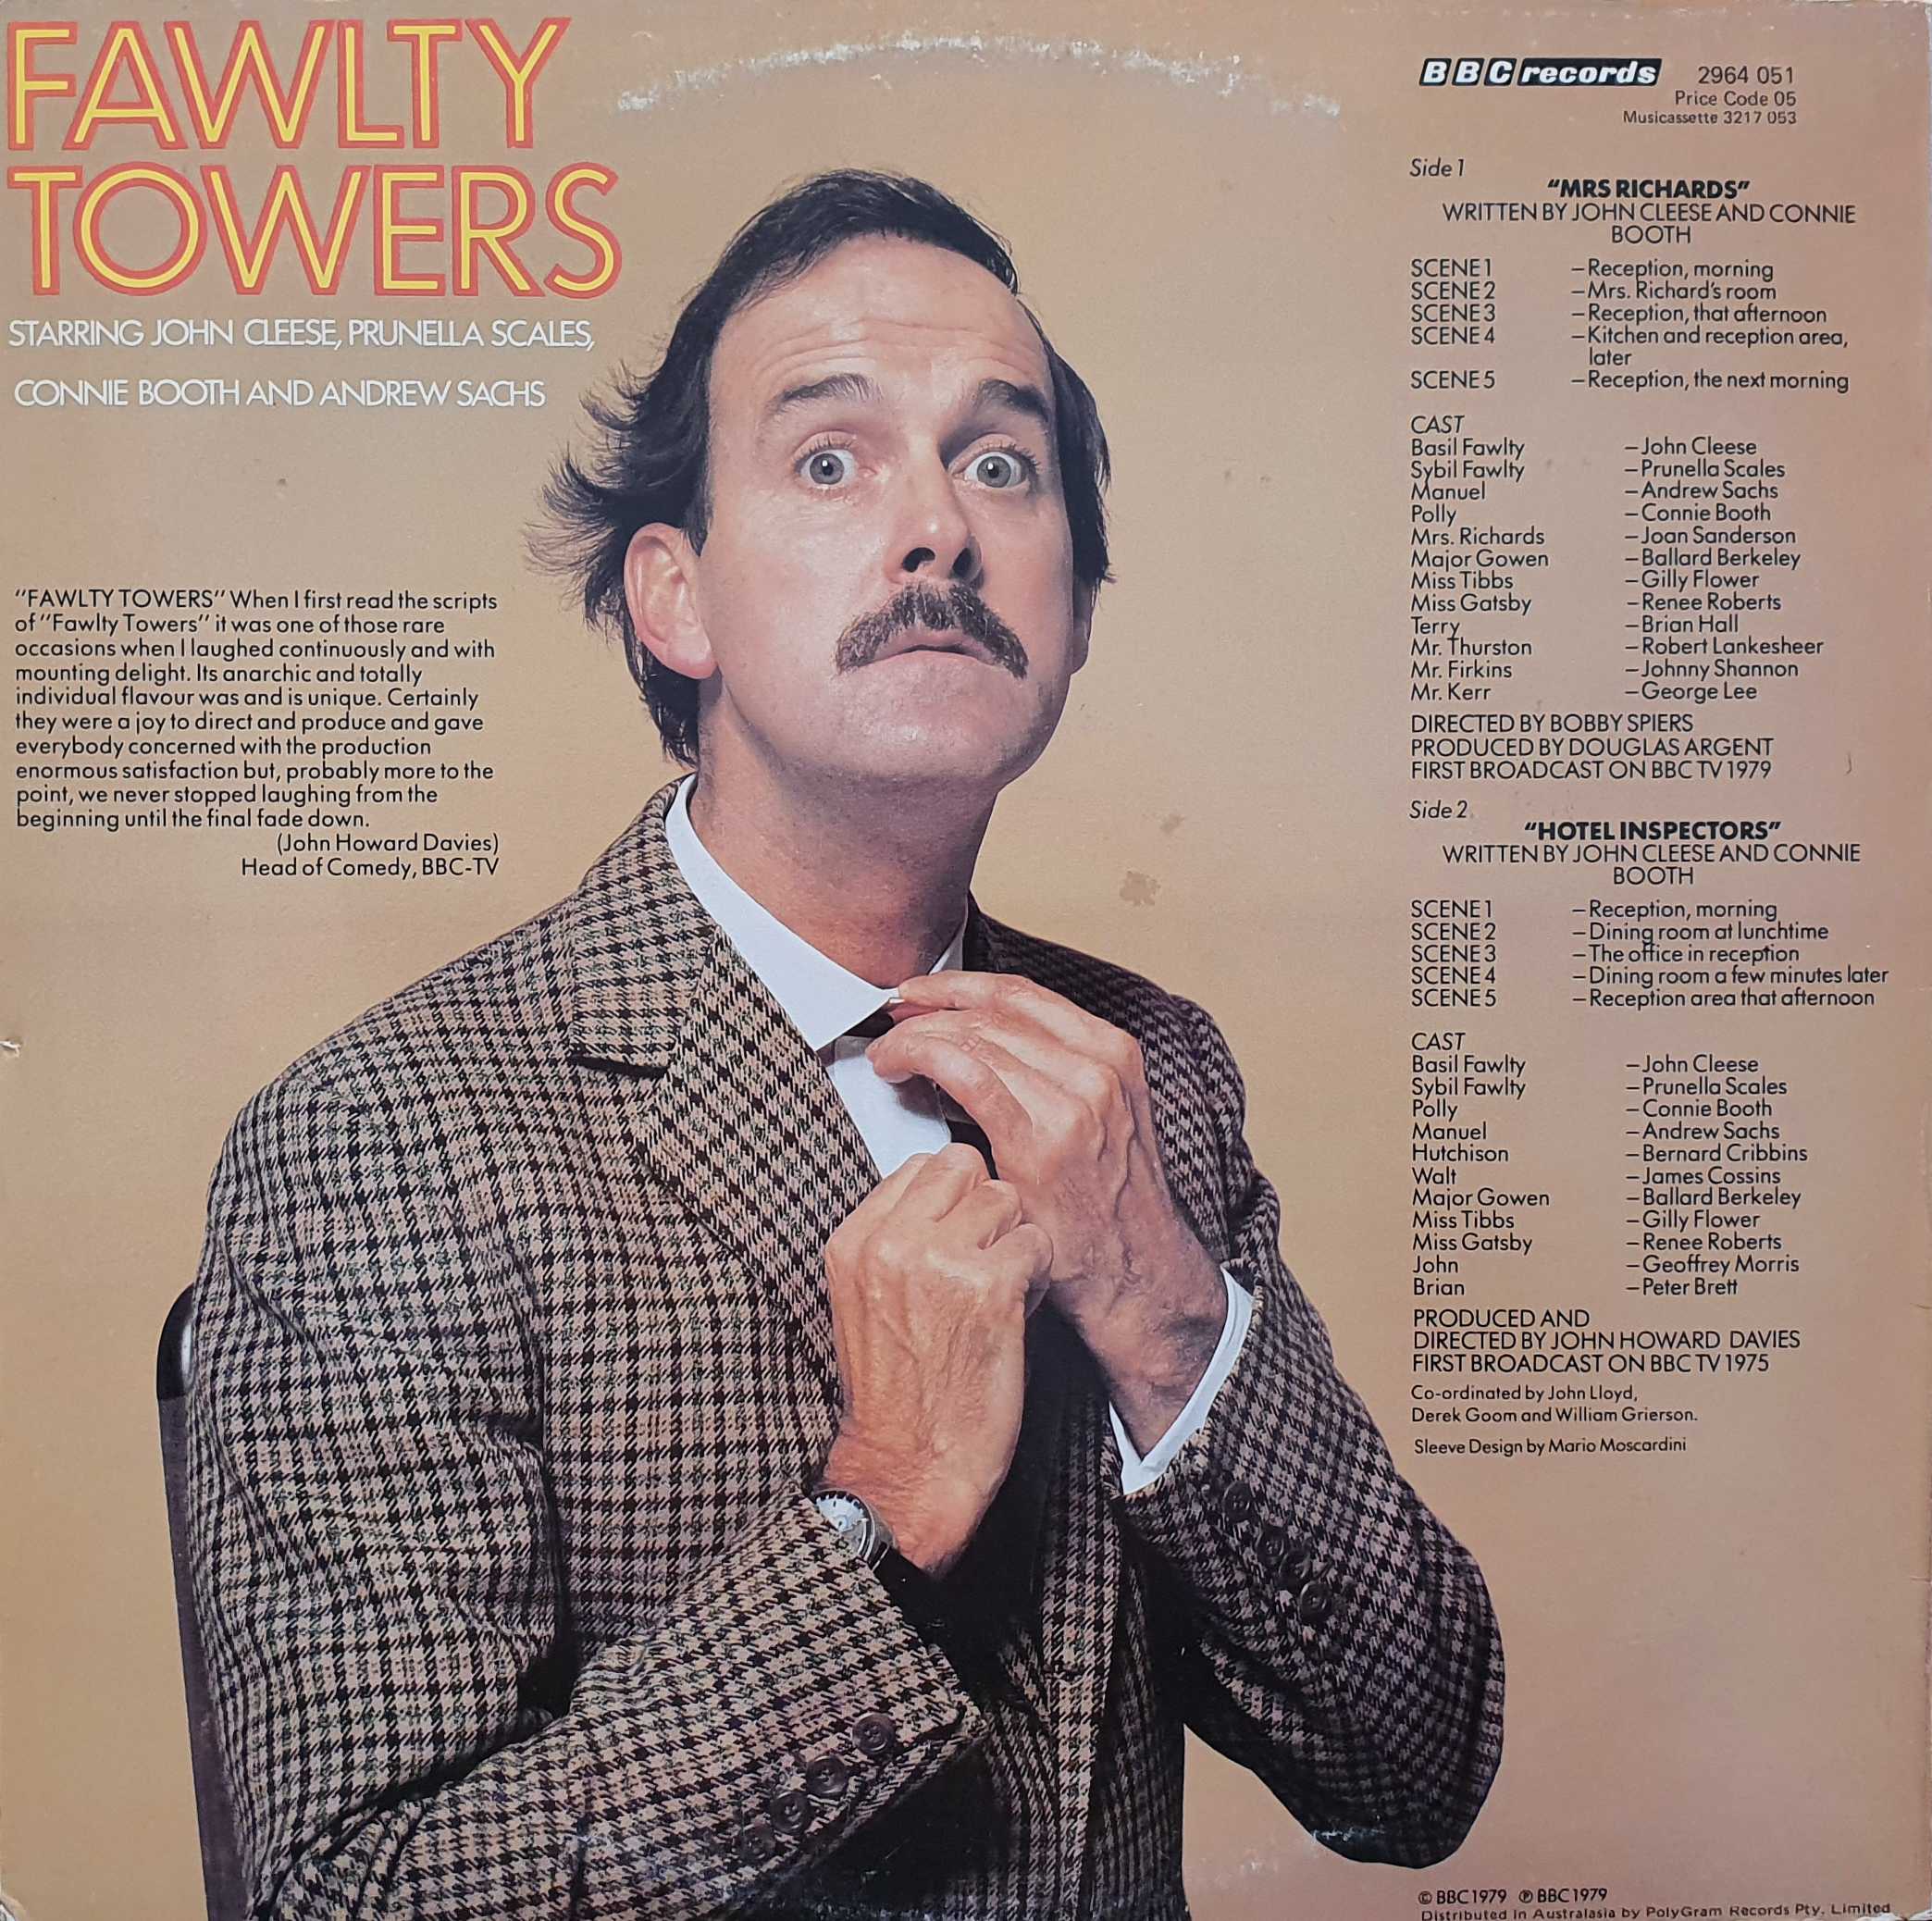 Picture of 2964 051 Fawlty Towers by artist John Cleese / Connie Booth from the BBC records and Tapes library